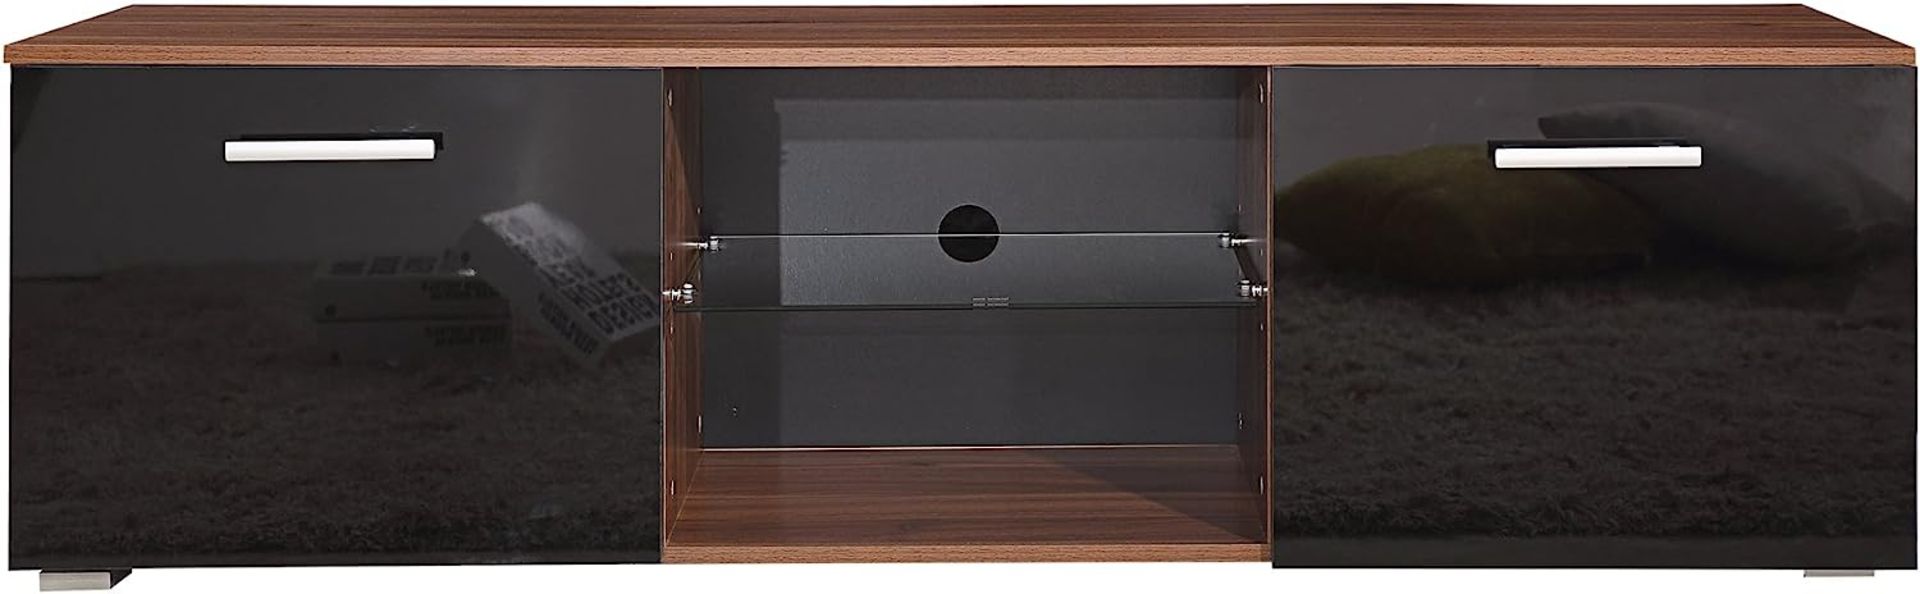 HARMIN MODERN 160CM TV STAND CABINET UNIT WITH HIGH GLOSS DOORS (BLACK ON WALNUT) - Image 4 of 9